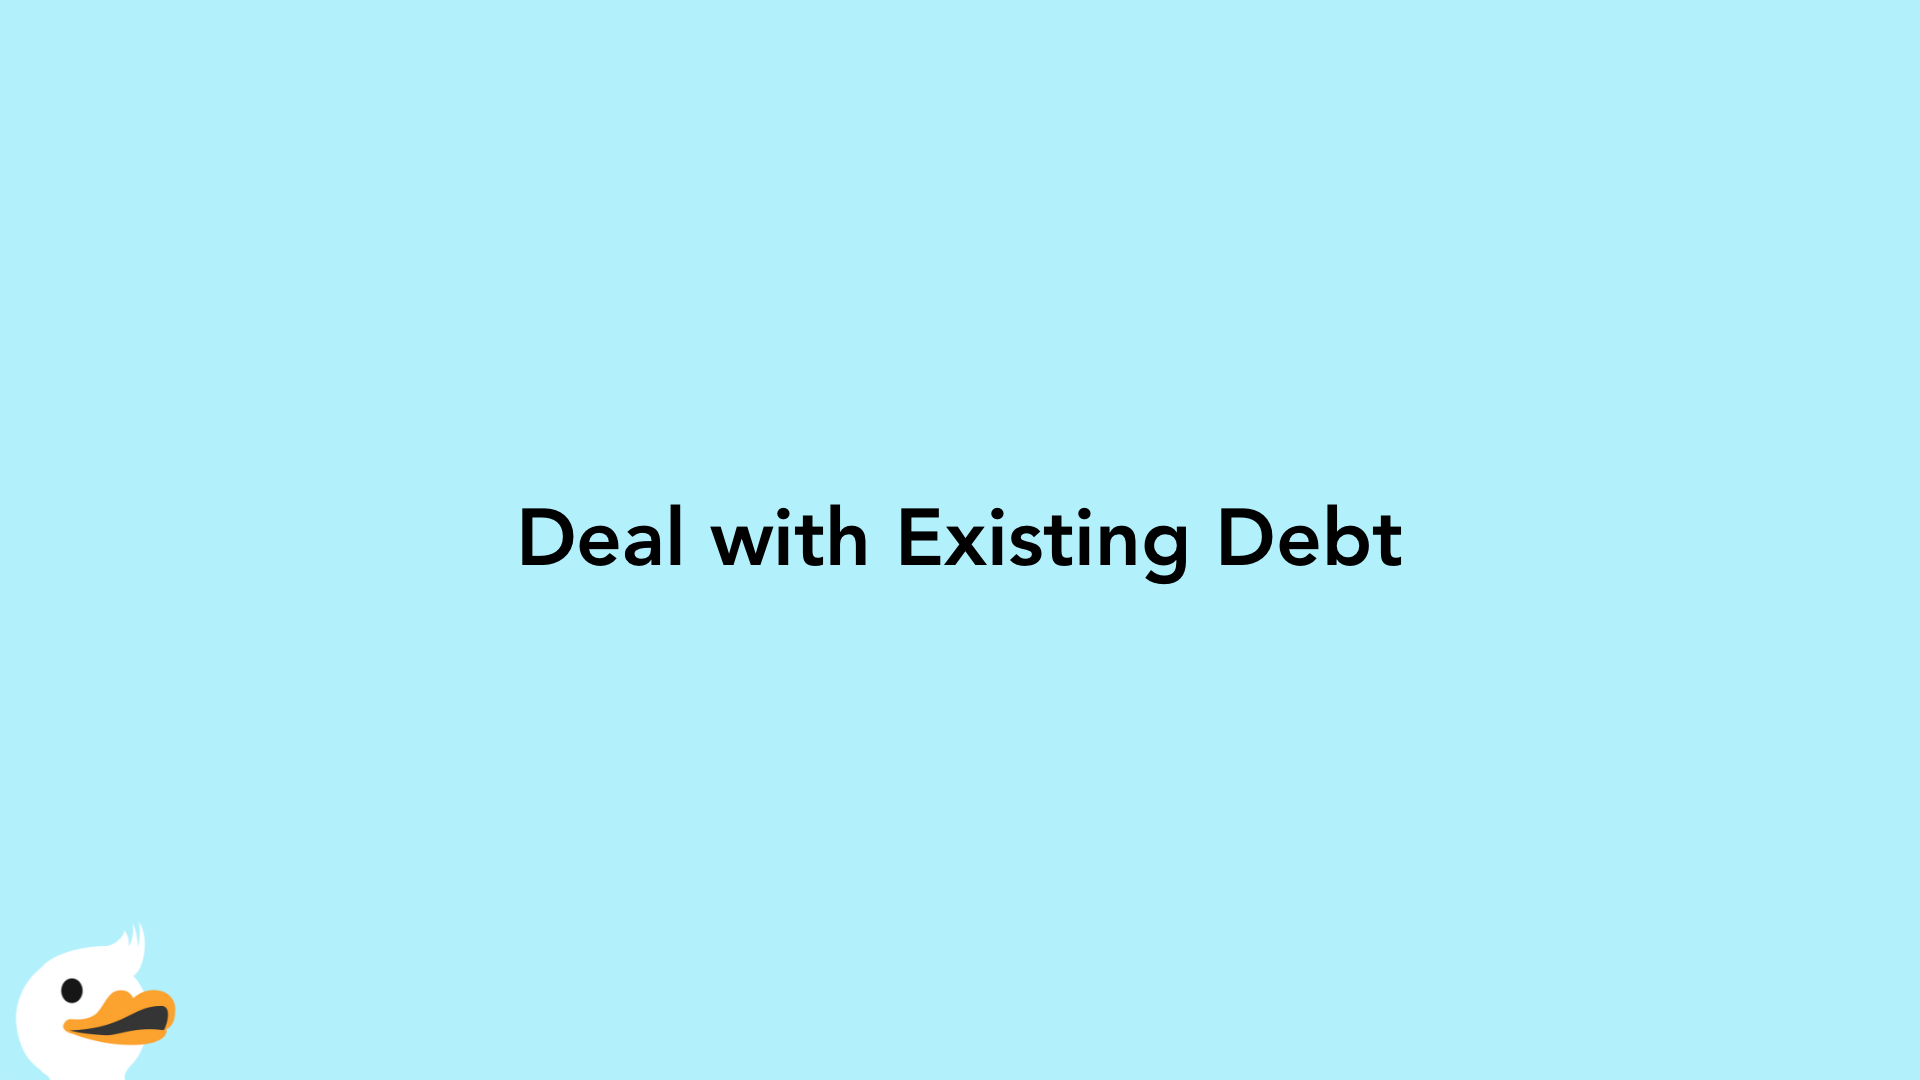 Deal with Existing Debt